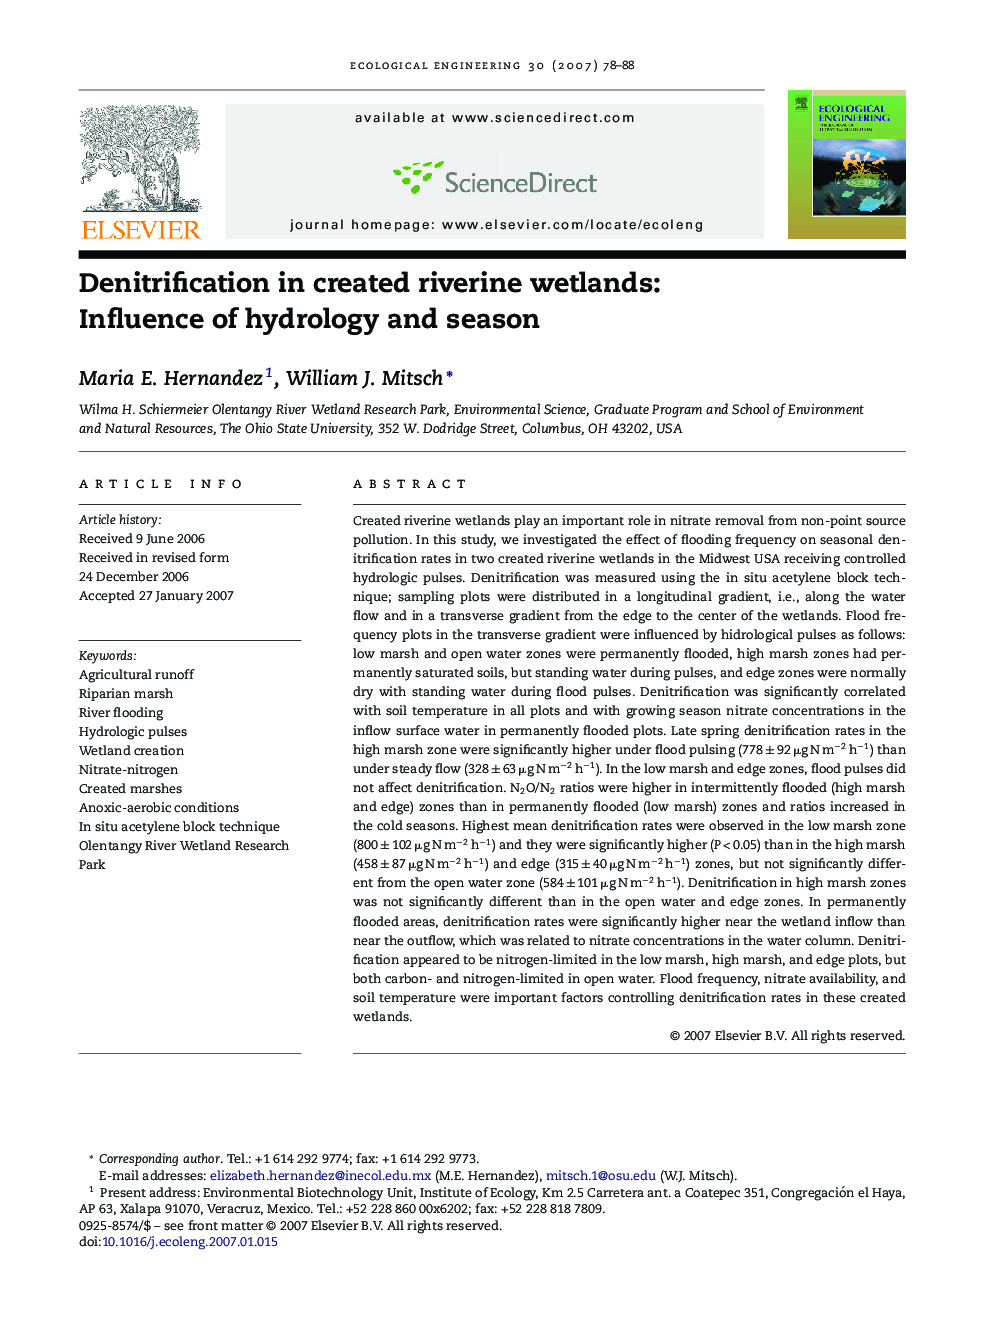 Denitrification in created riverine wetlands: Influence of hydrology and season